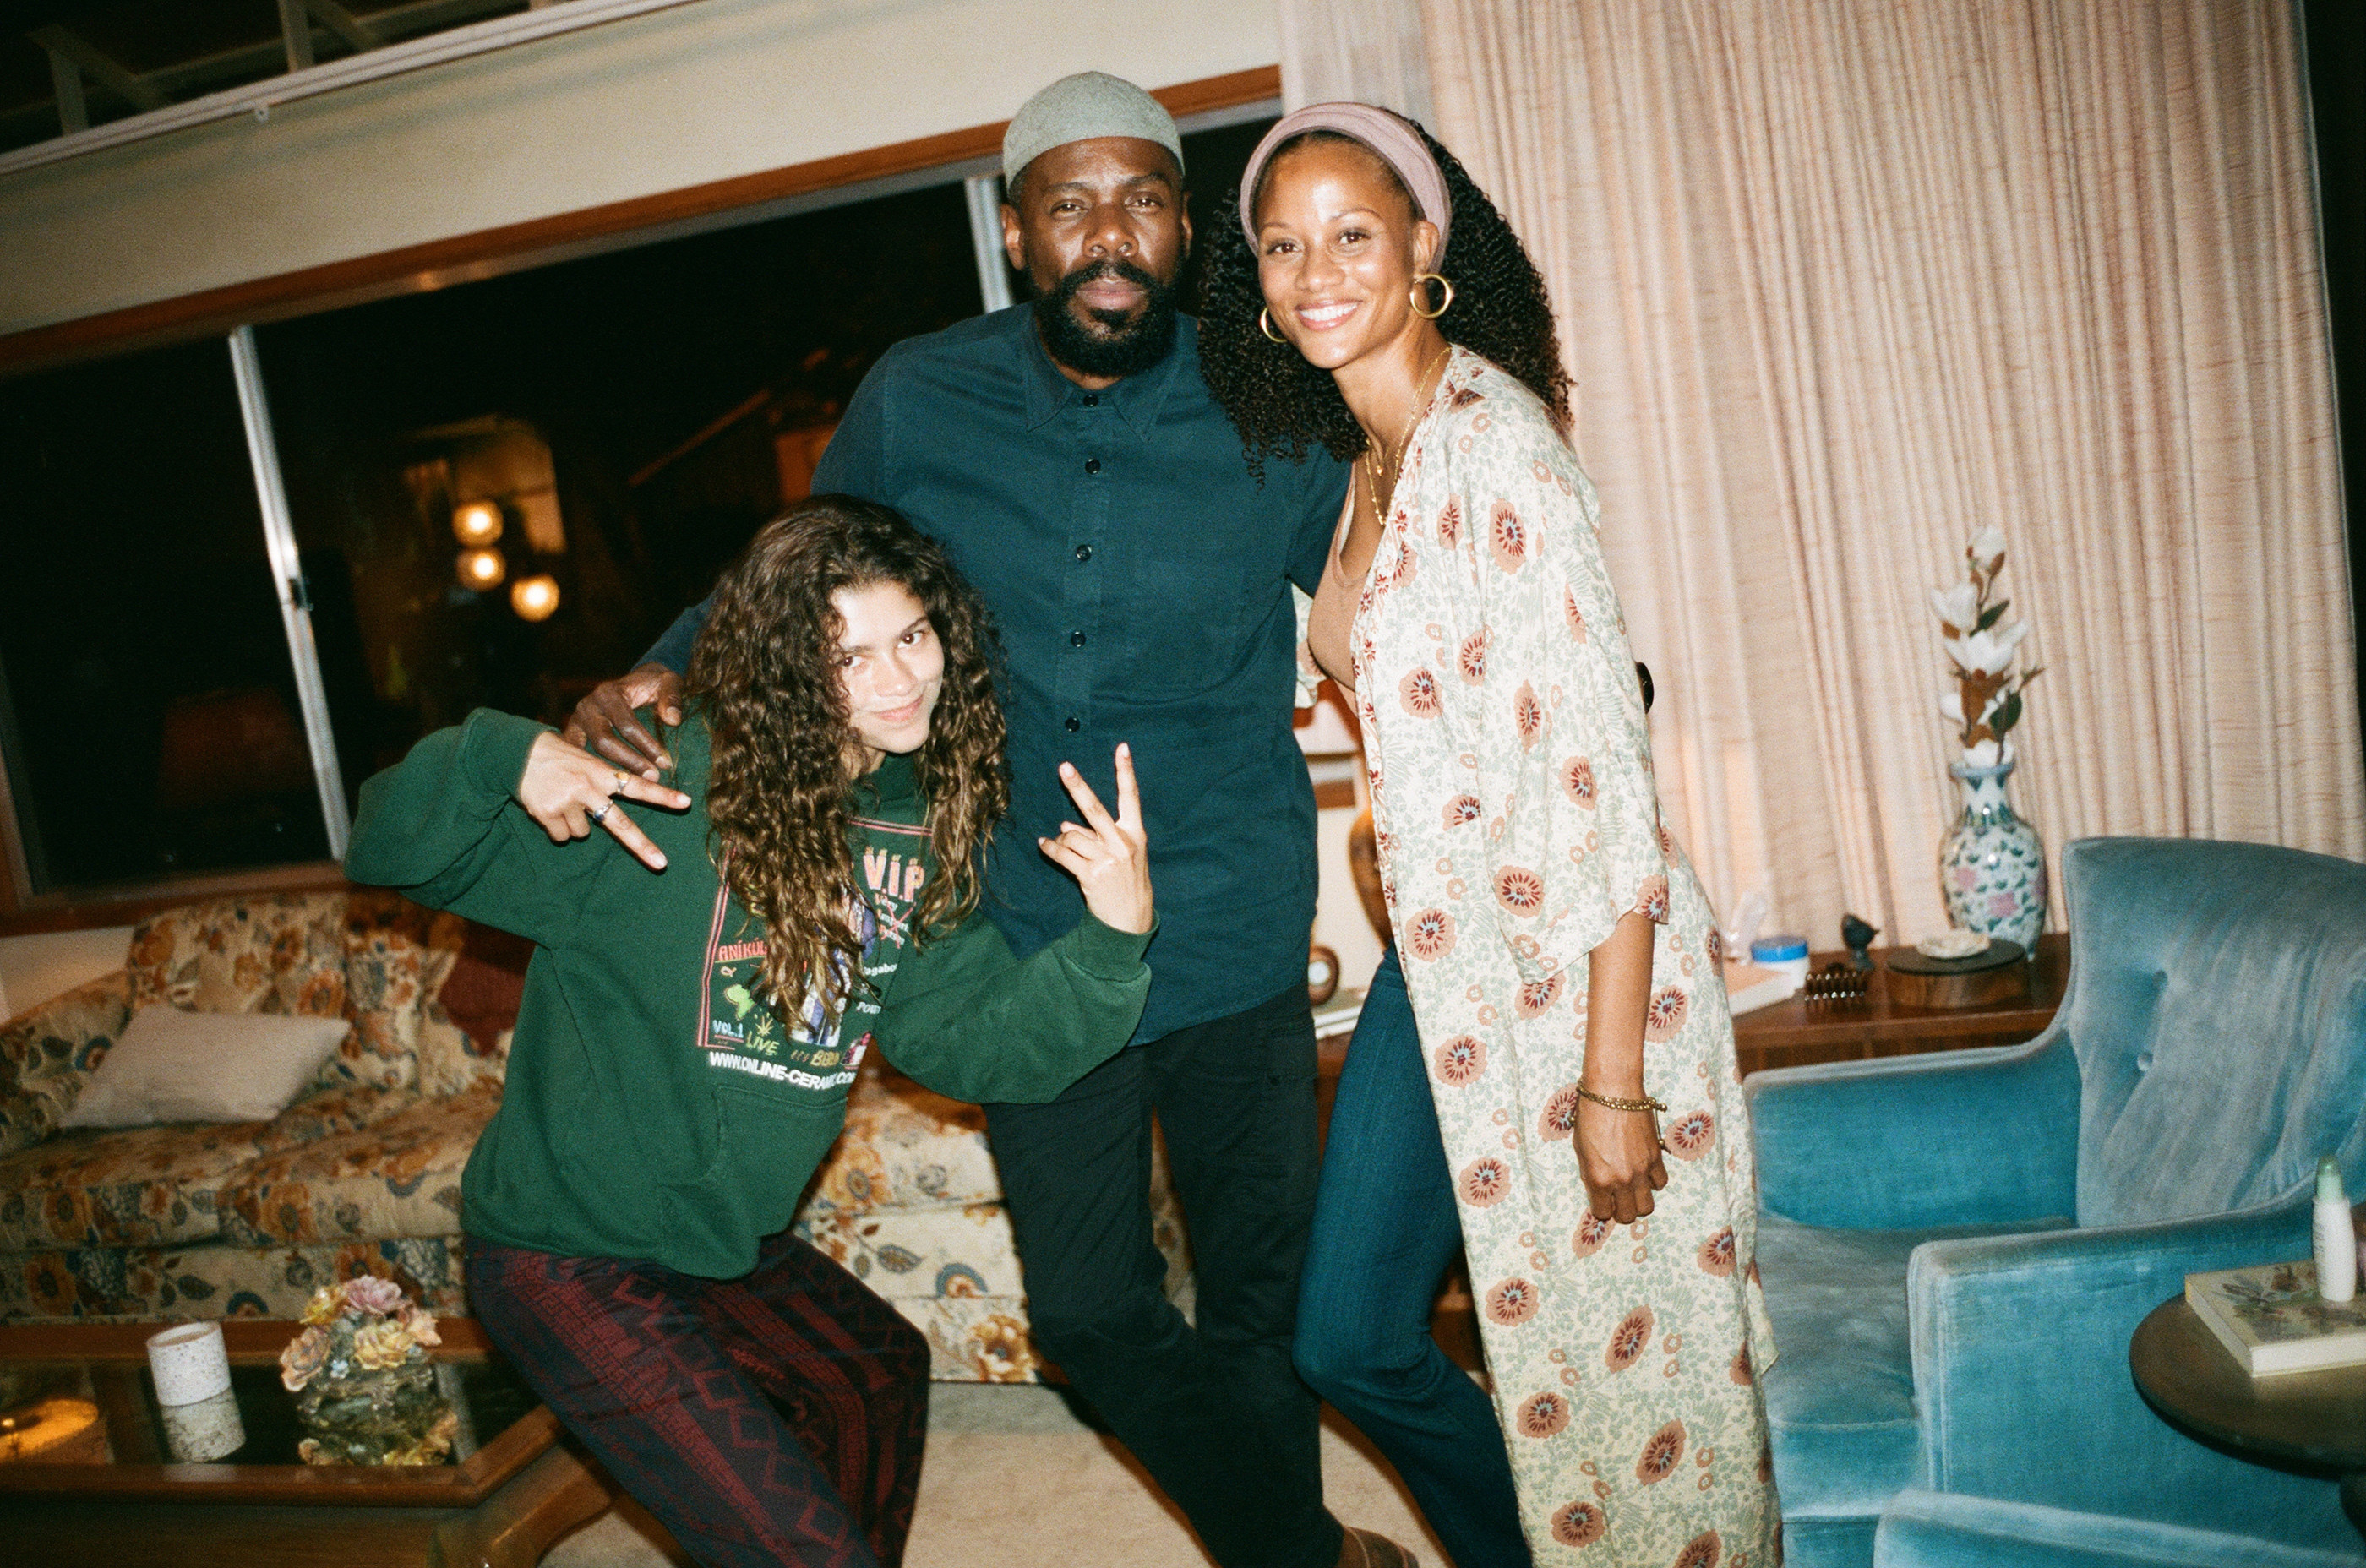 Zendaya, and the actors who play her sponsor and mom